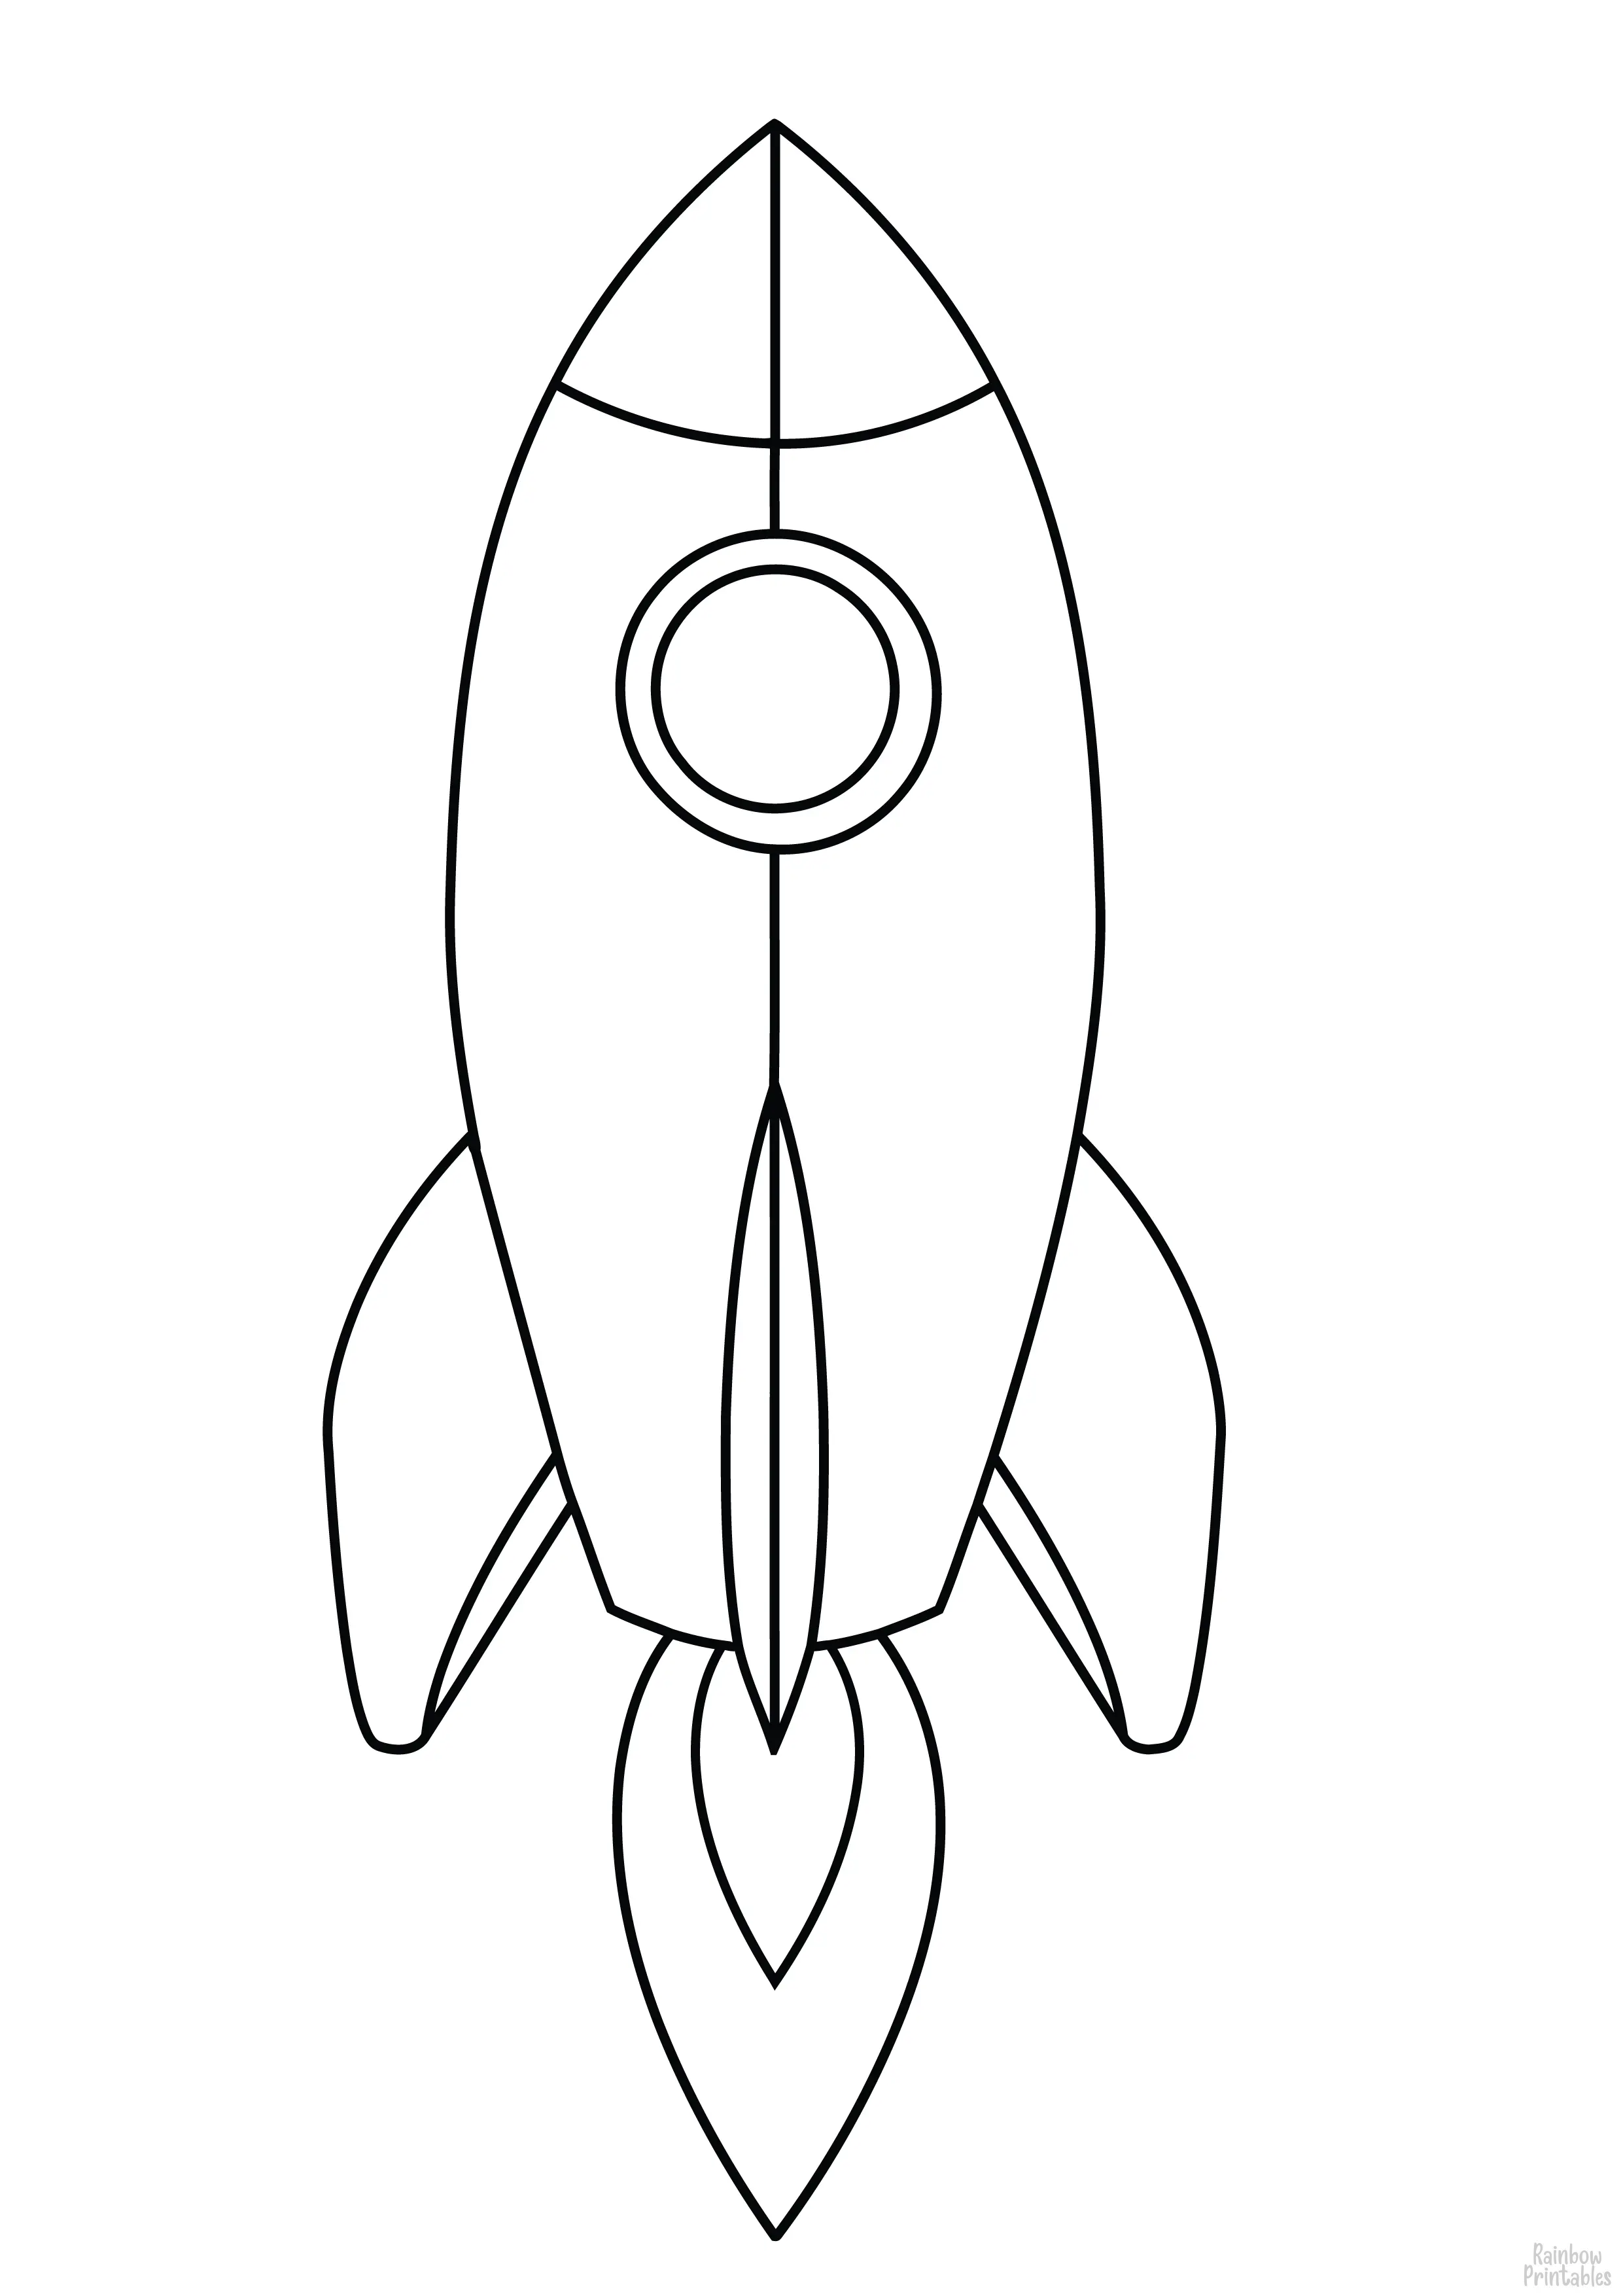 ROCKET SHIP AIRCRAFT Clipart Coloring Pages for Kids Adults Art Activities Line Art